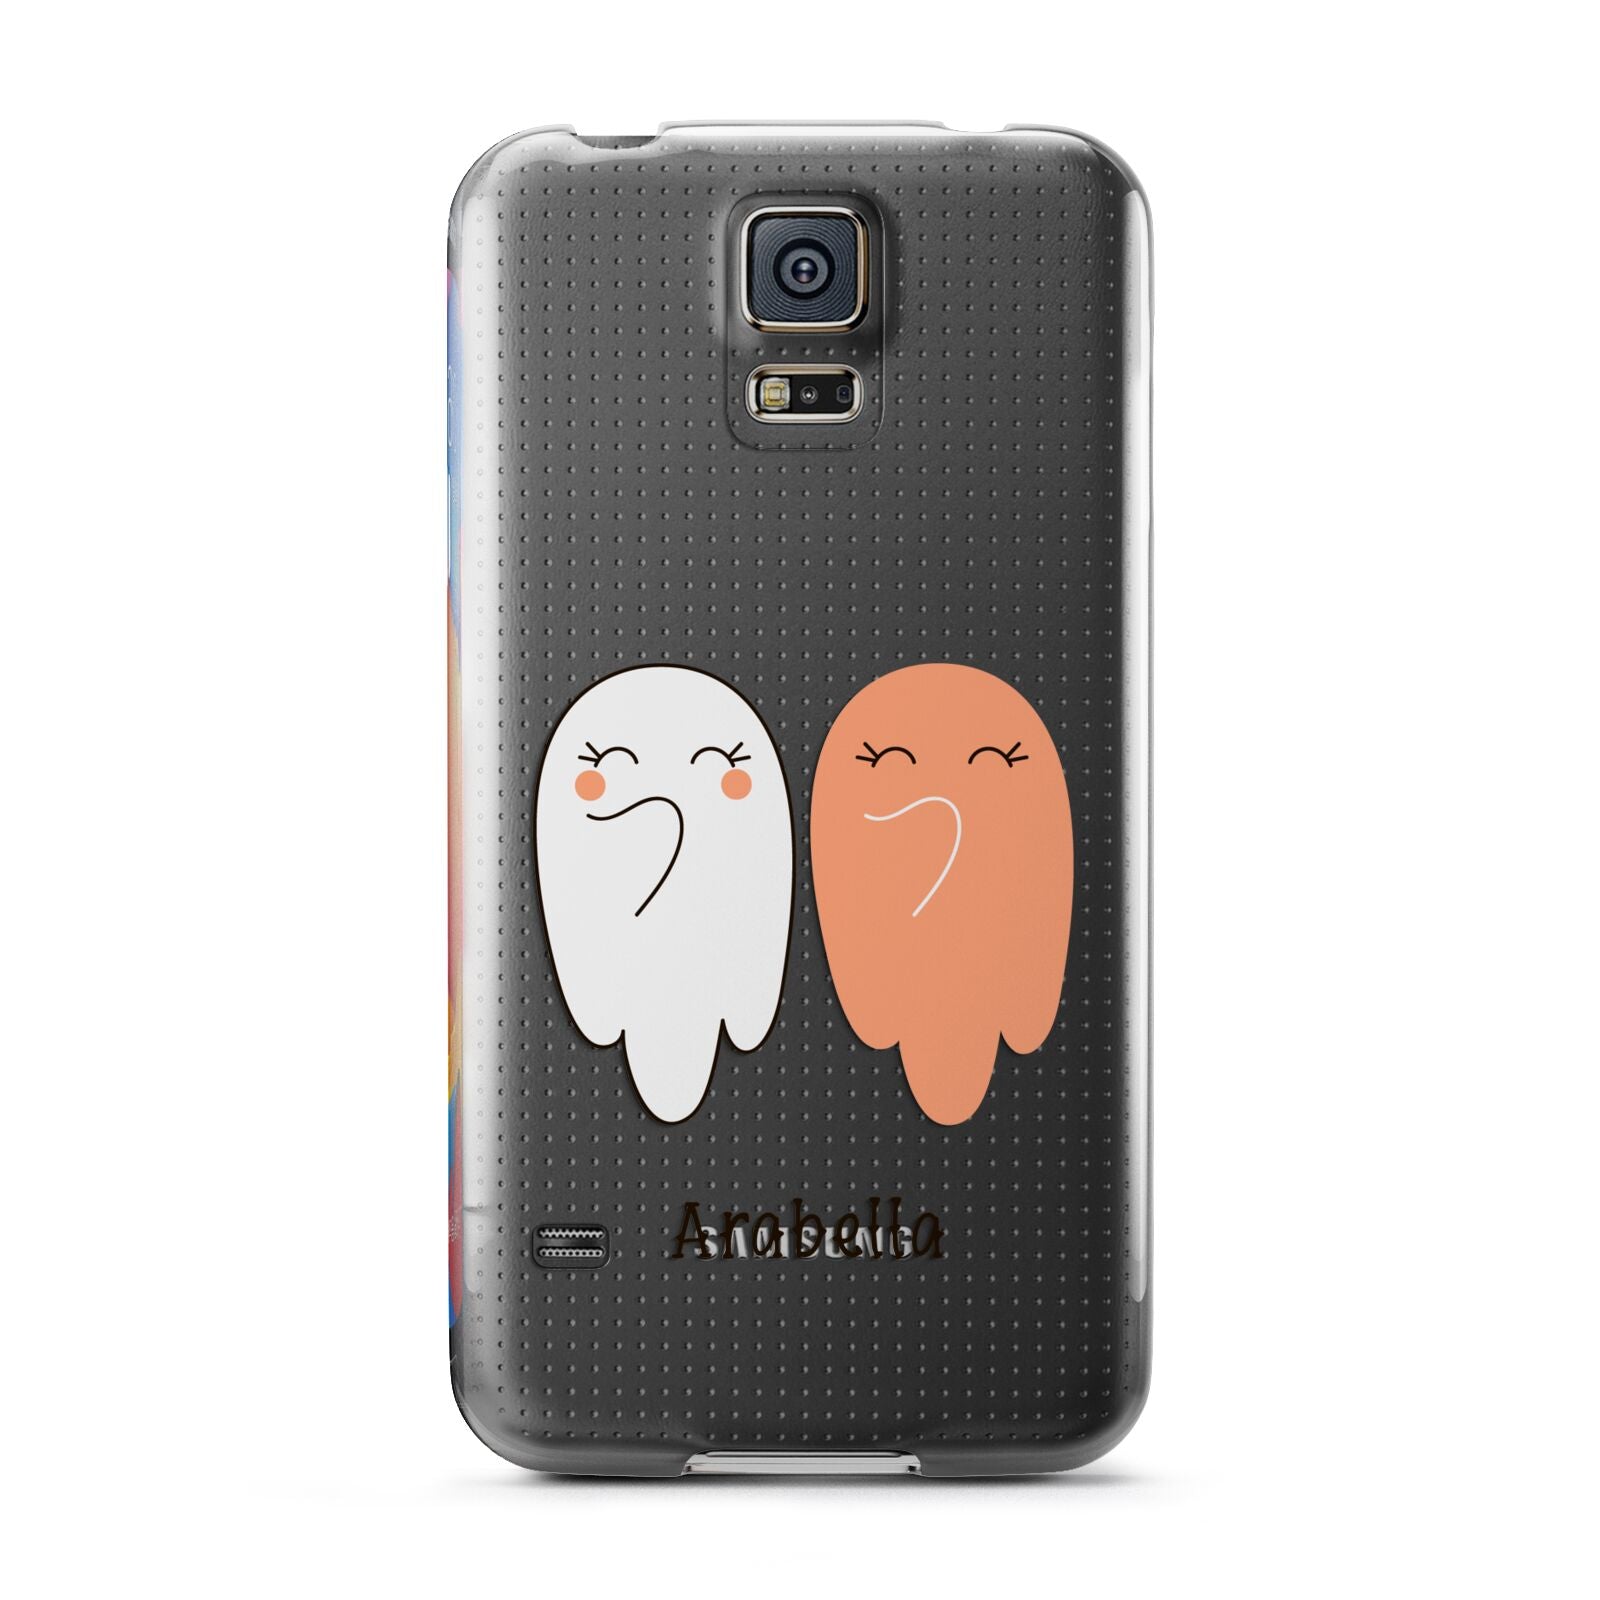 Two Ghosts Samsung Galaxy S5 Case